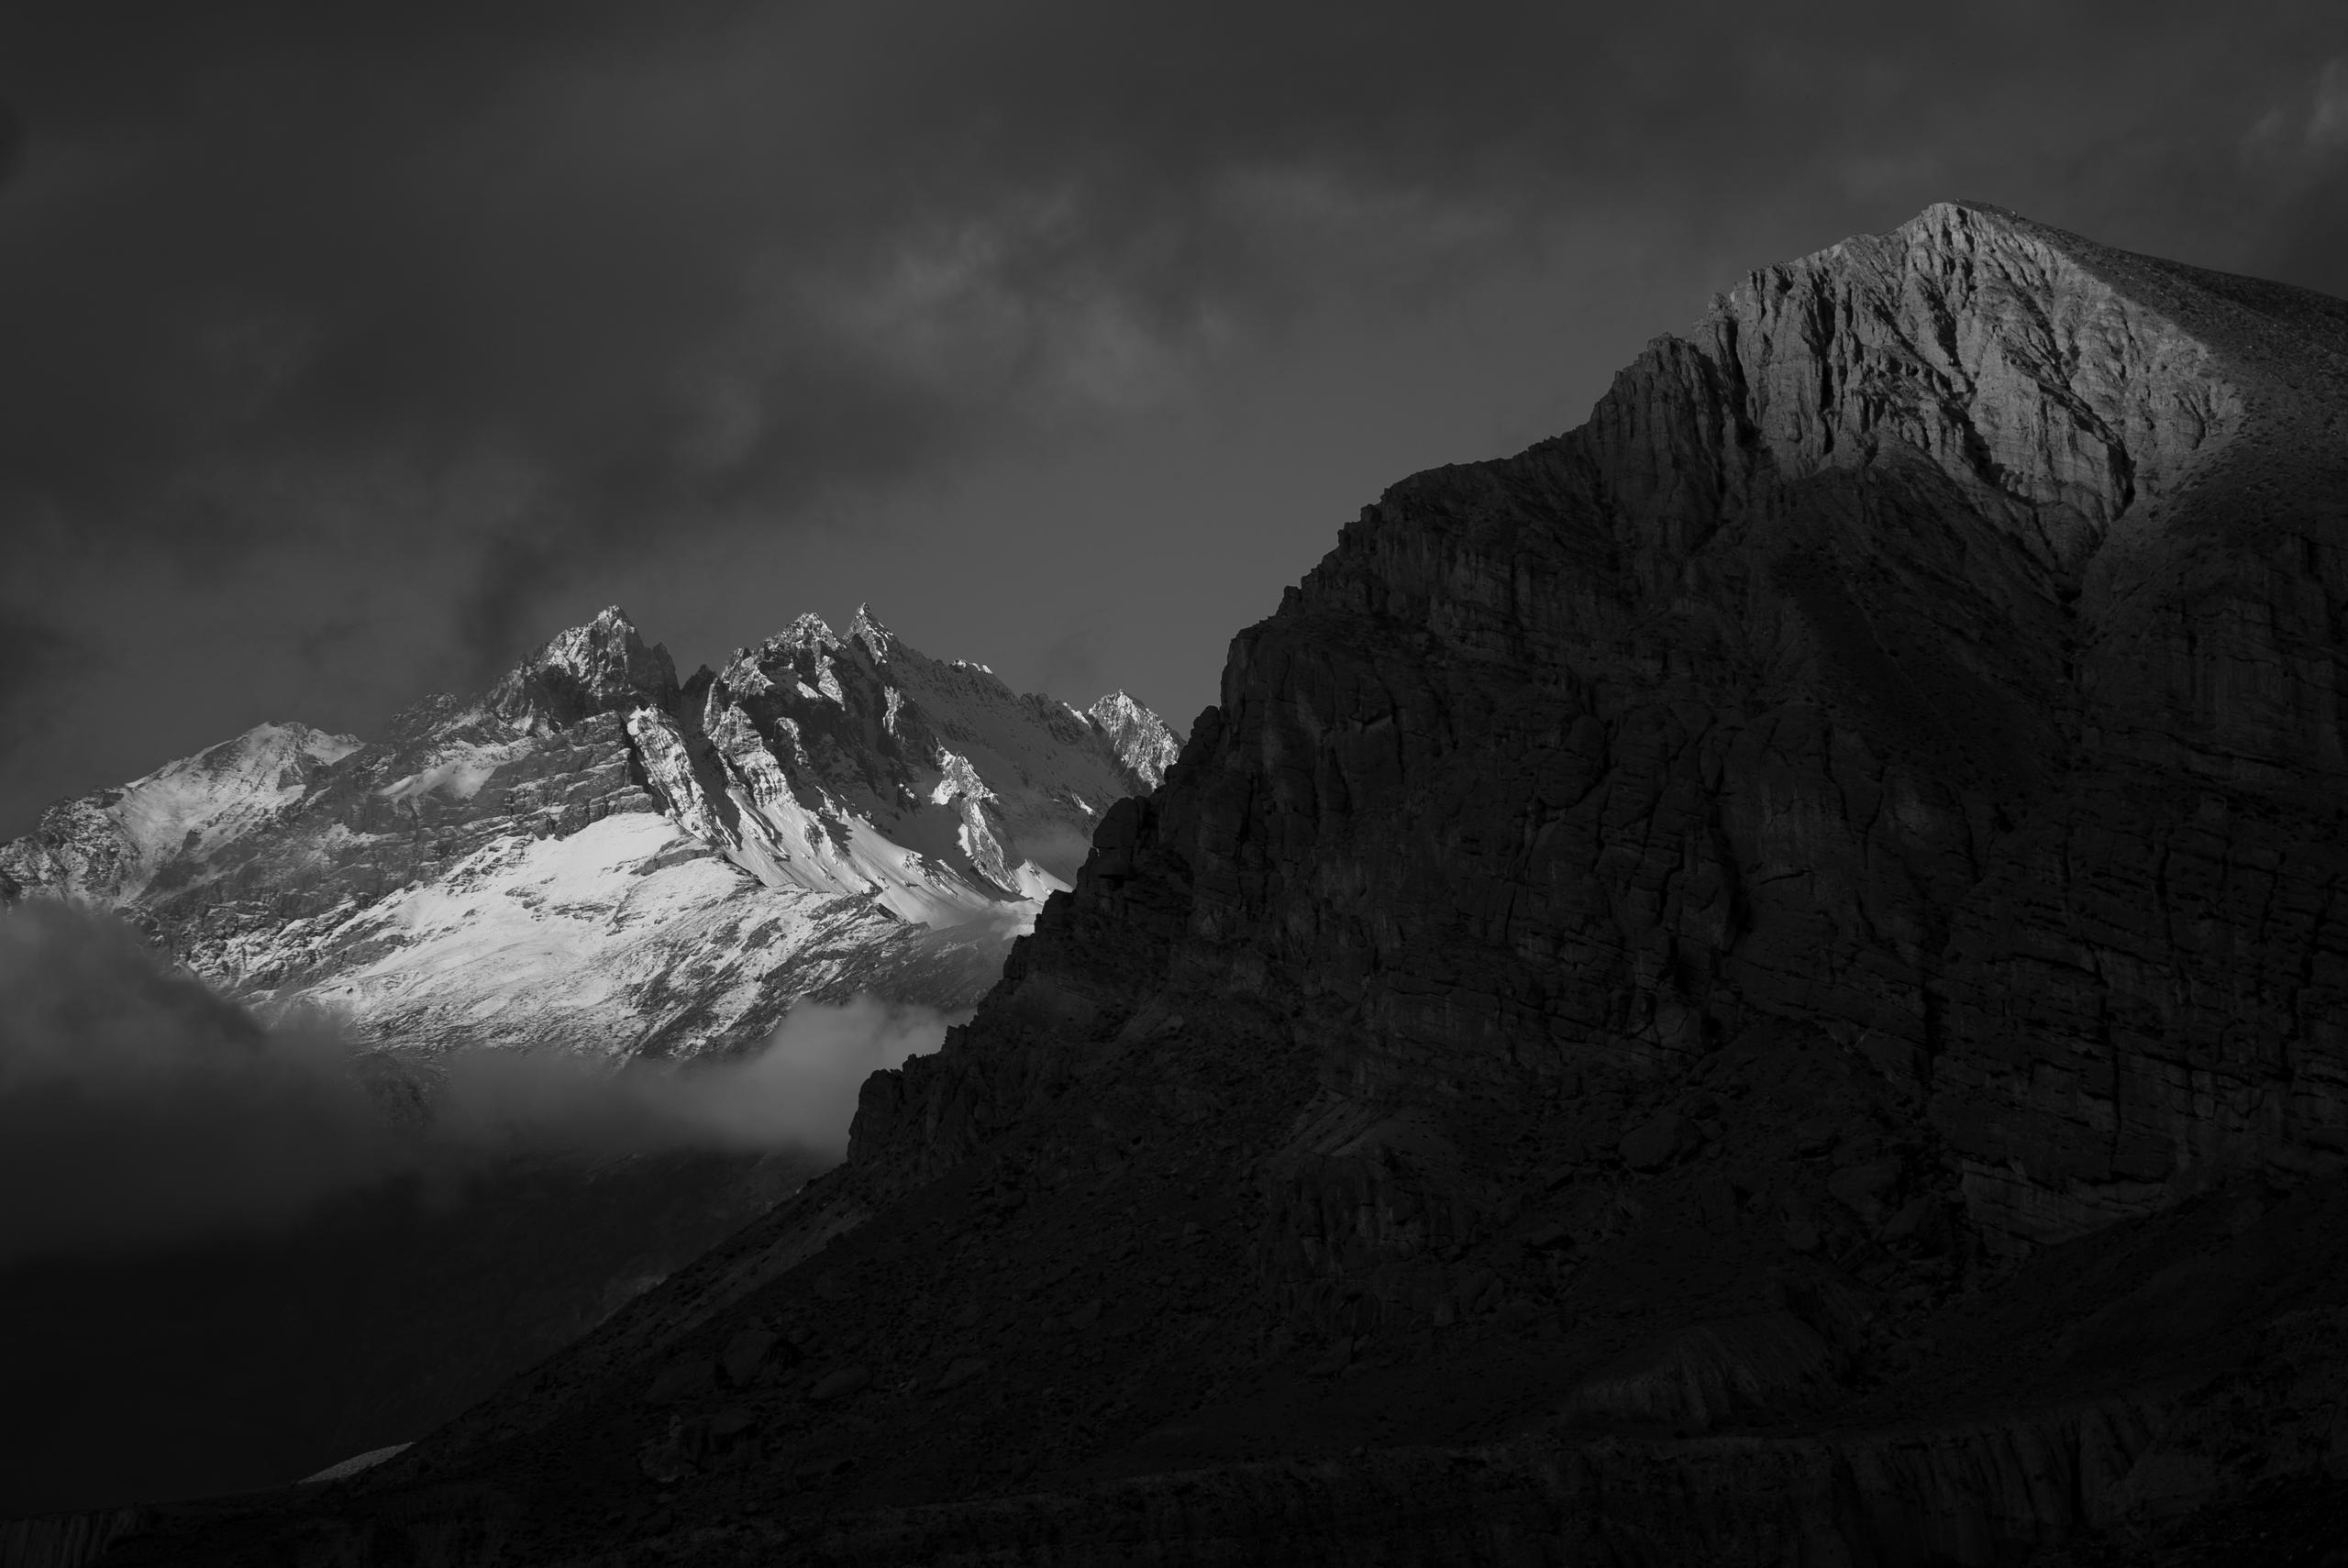 Moody black and white photograph of Himalayan mountains